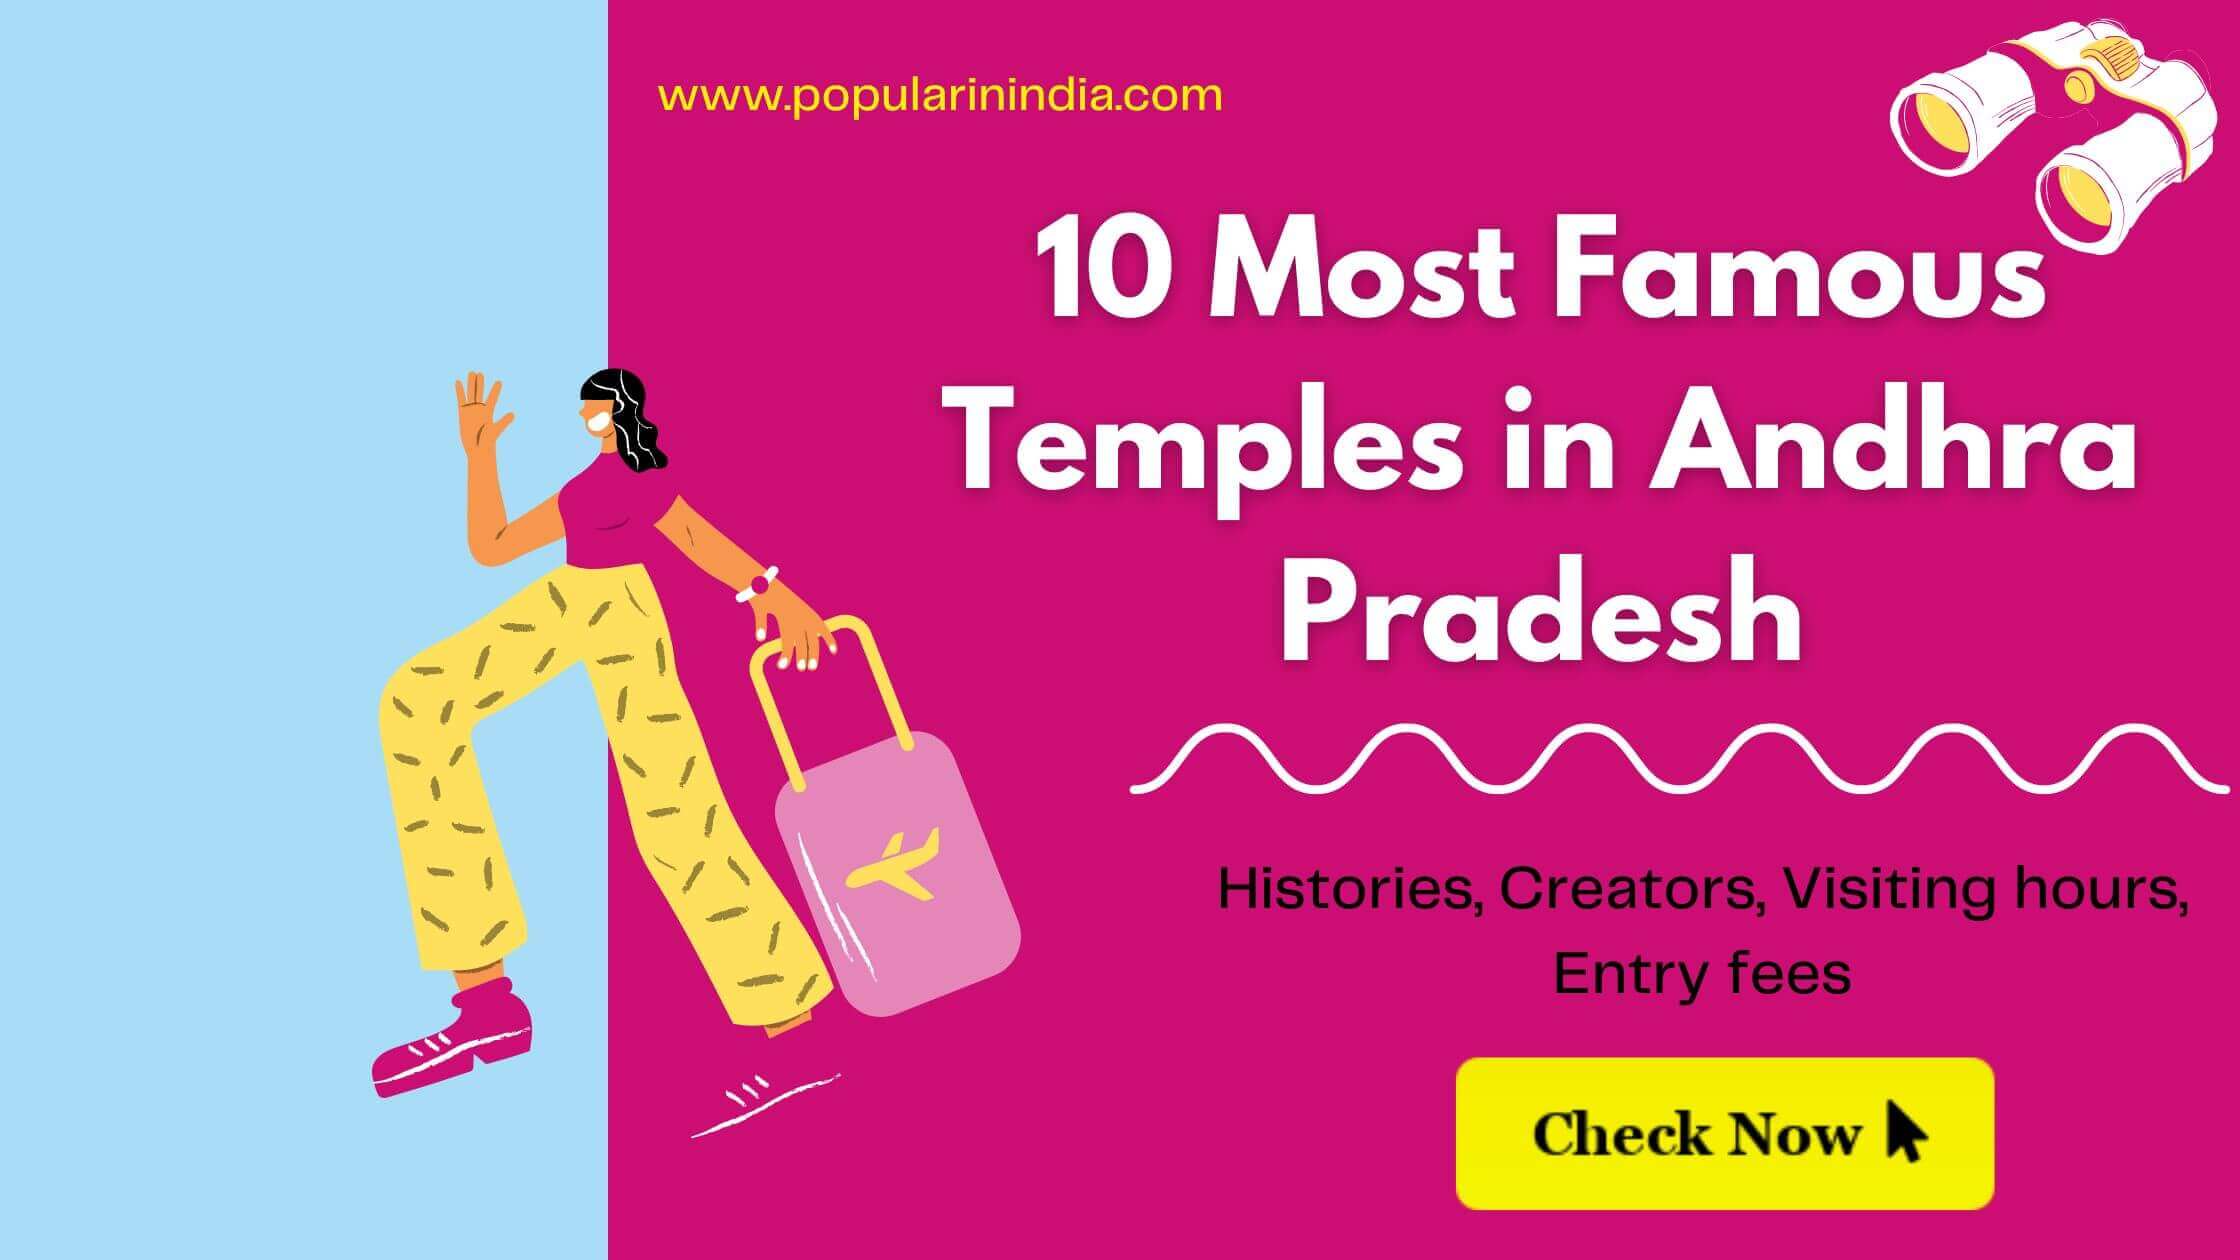 10 Most Famous Temples in Andhra Pradesh